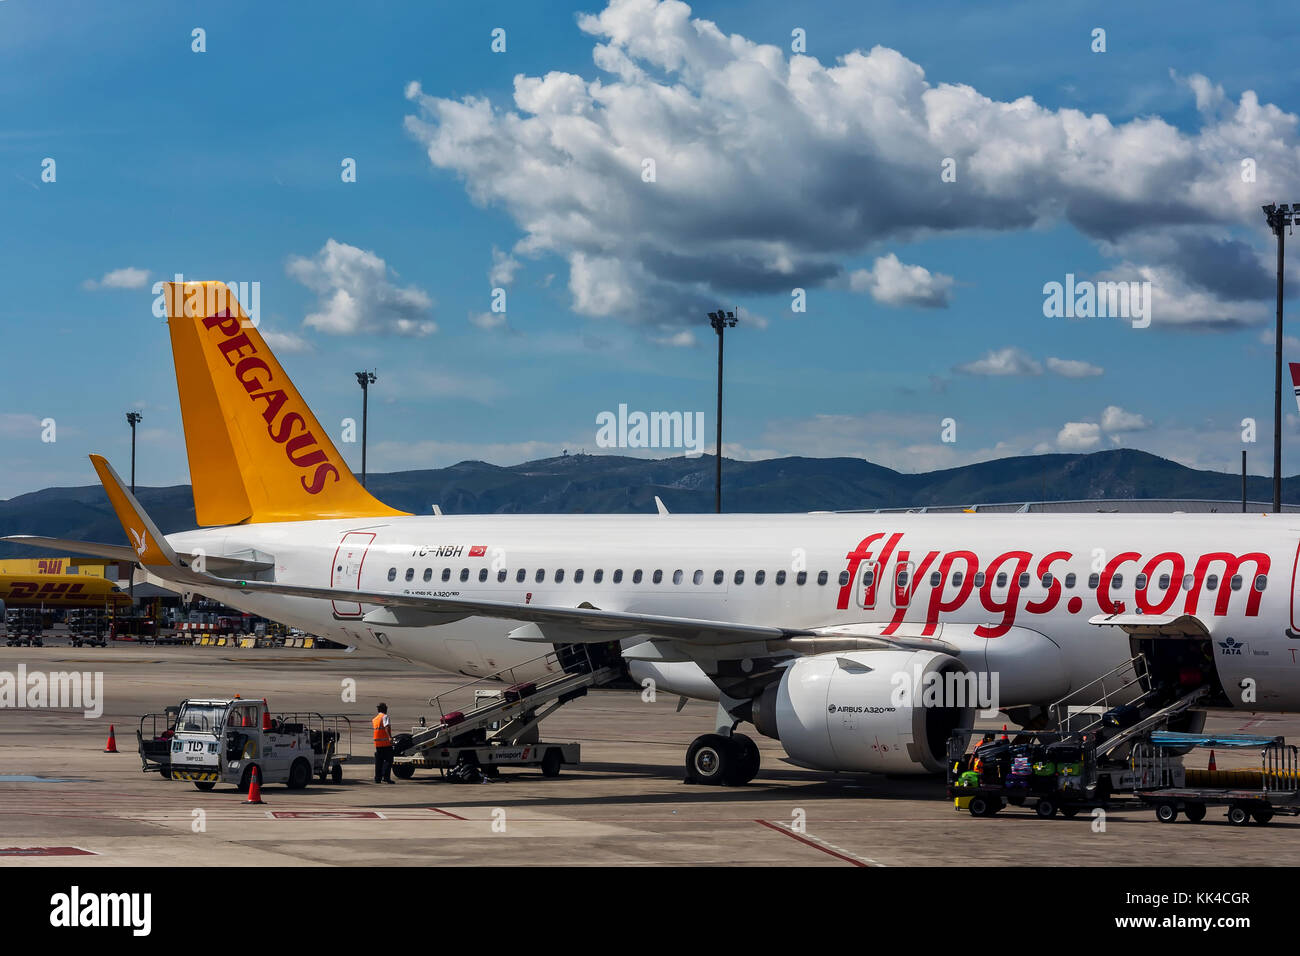 Spain, Barcelona - 26.09.2017: Unloading of the airplane by postal PEGASUS service at the airport Stock Photo